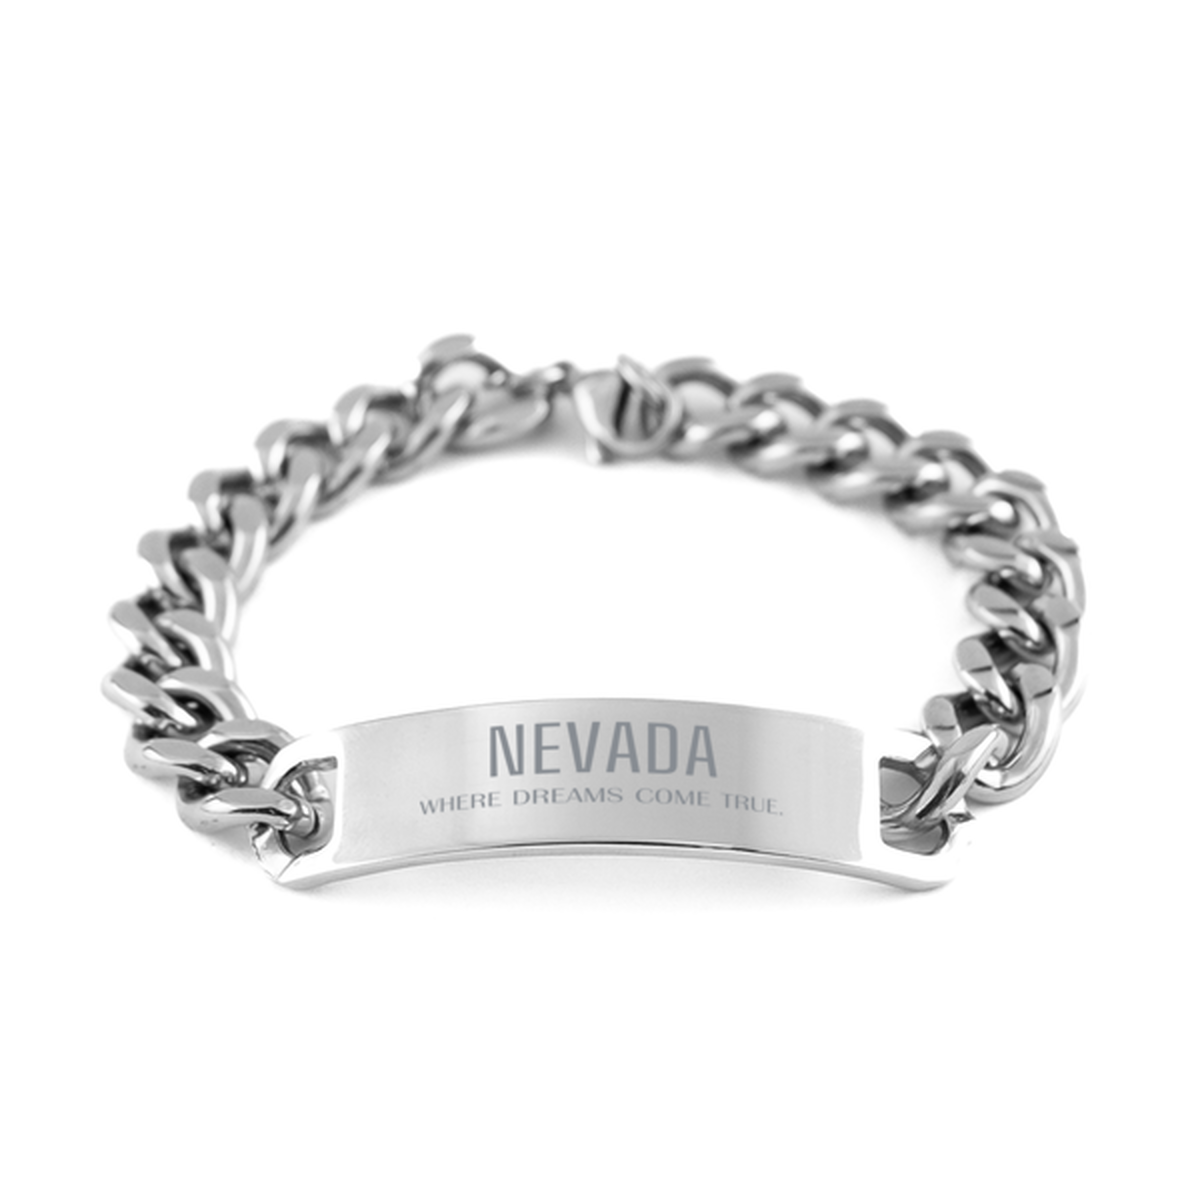 Love Nevada State Cuban Chain Stainless Steel Bracelet, Nevada Where dreams come true, Birthday Inspirational Gifts For Nevada Men, Women, Friends